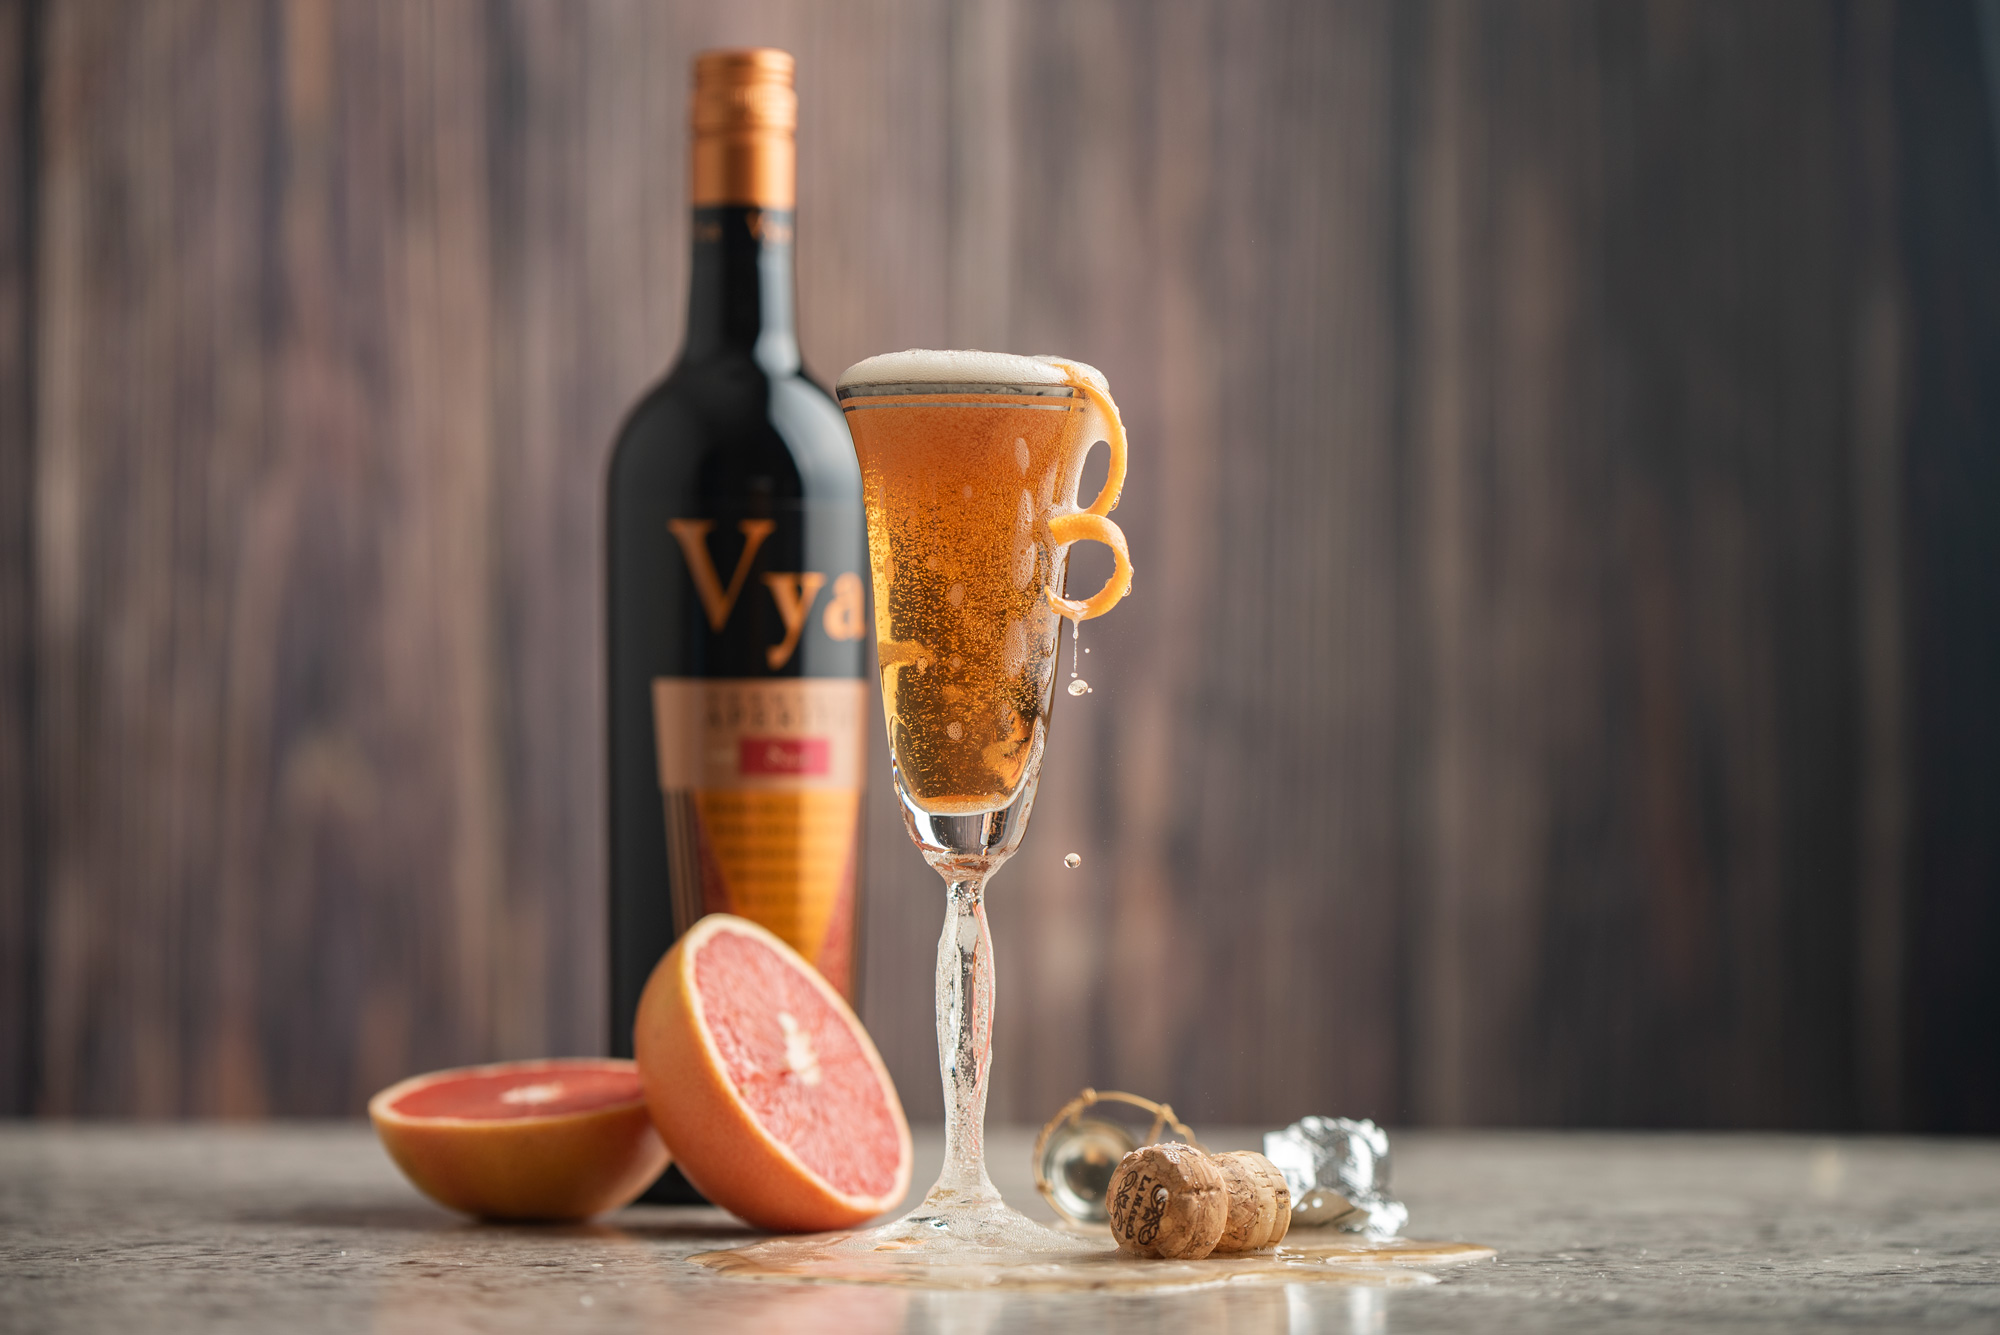 A champagne flute filled with the social hour cocktail with a bottle of Vya Sweet Vermouth in the background and grapefruit in the foreground.